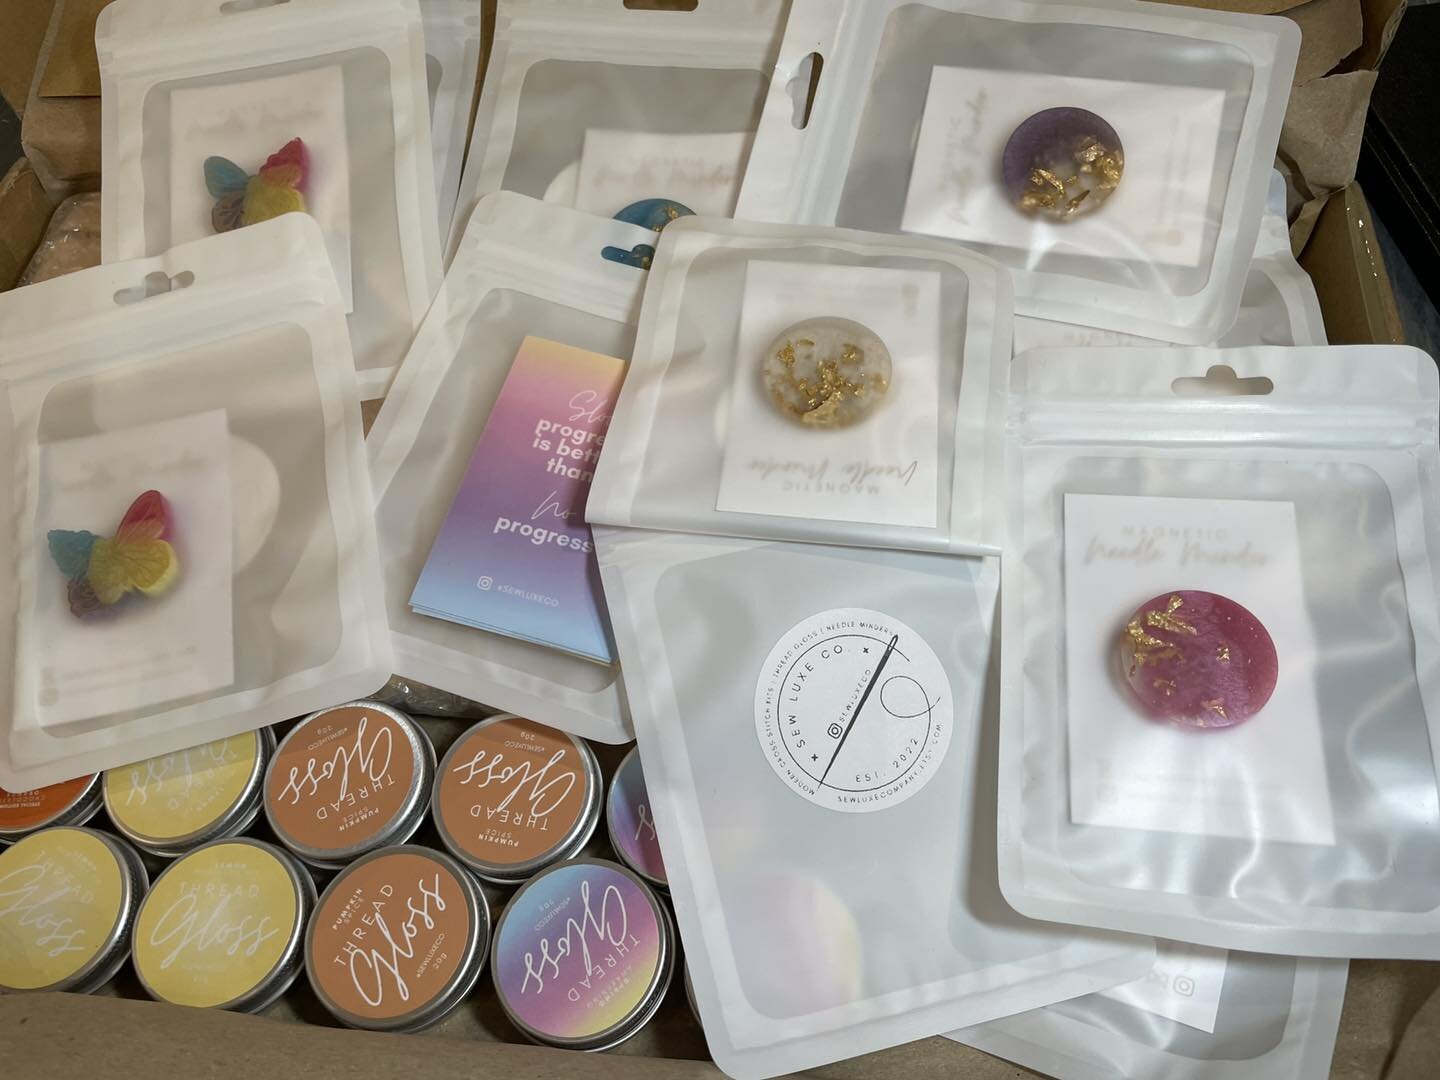 Sew? Very excited. A new supply of fabulous Needle Minders &amp; glorious tins of Thread Gloss from the lovely Sew Luxe Co. Just in today . If you love to hand stitch or want to give a special gift to a happy sewer then these are for you. 
#sewluxeco